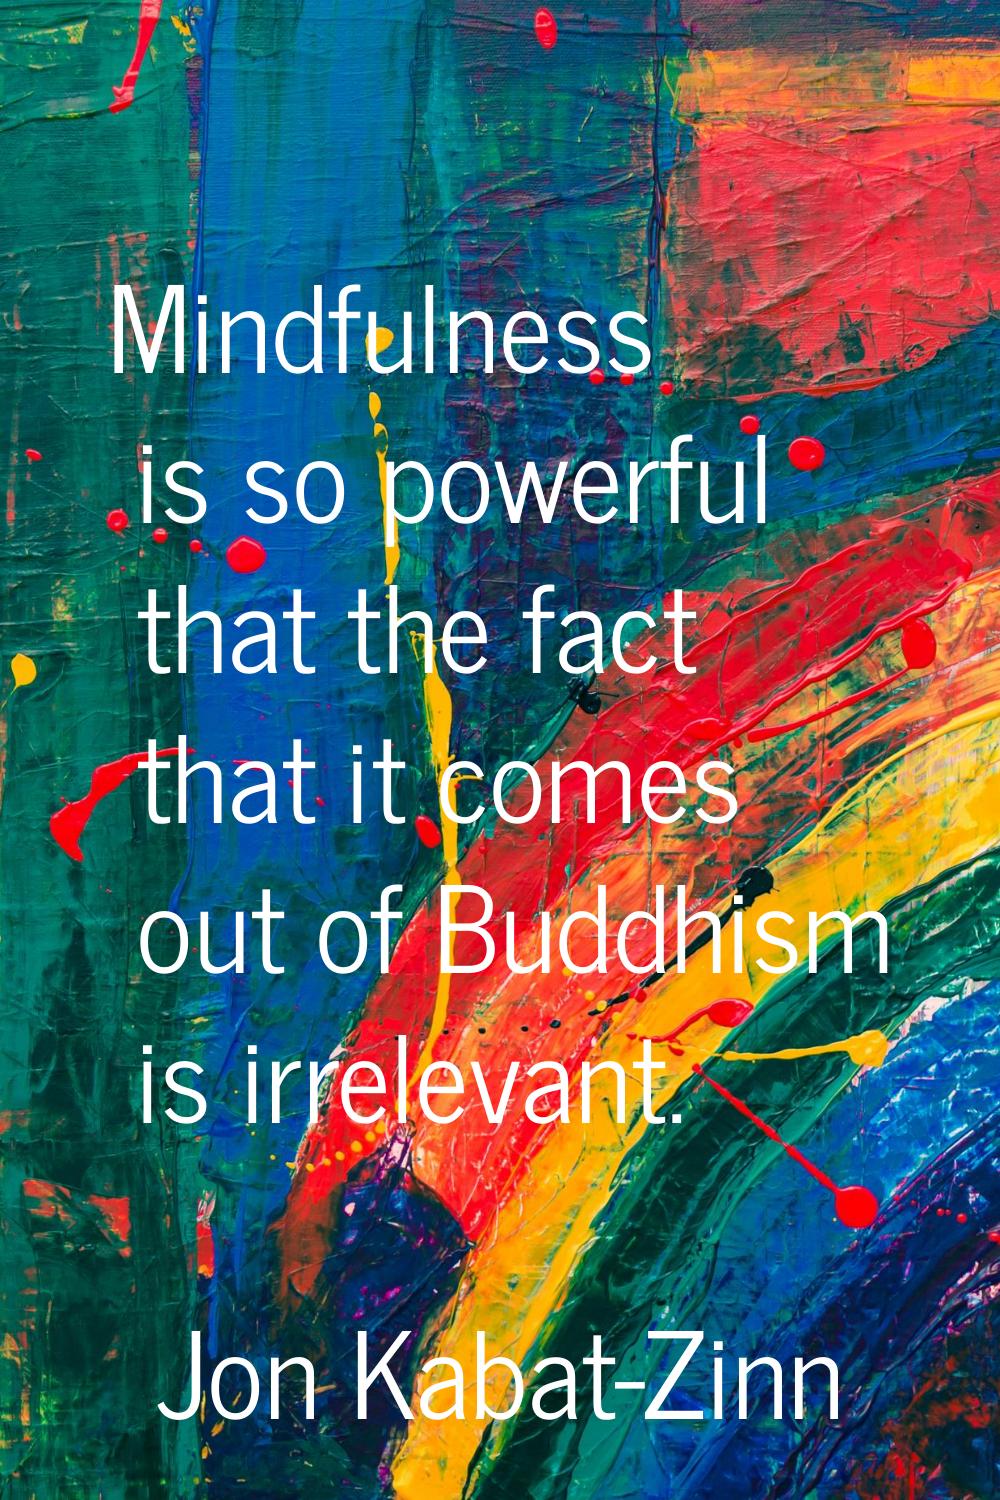 Mindfulness is so powerful that the fact that it comes out of Buddhism is irrelevant.